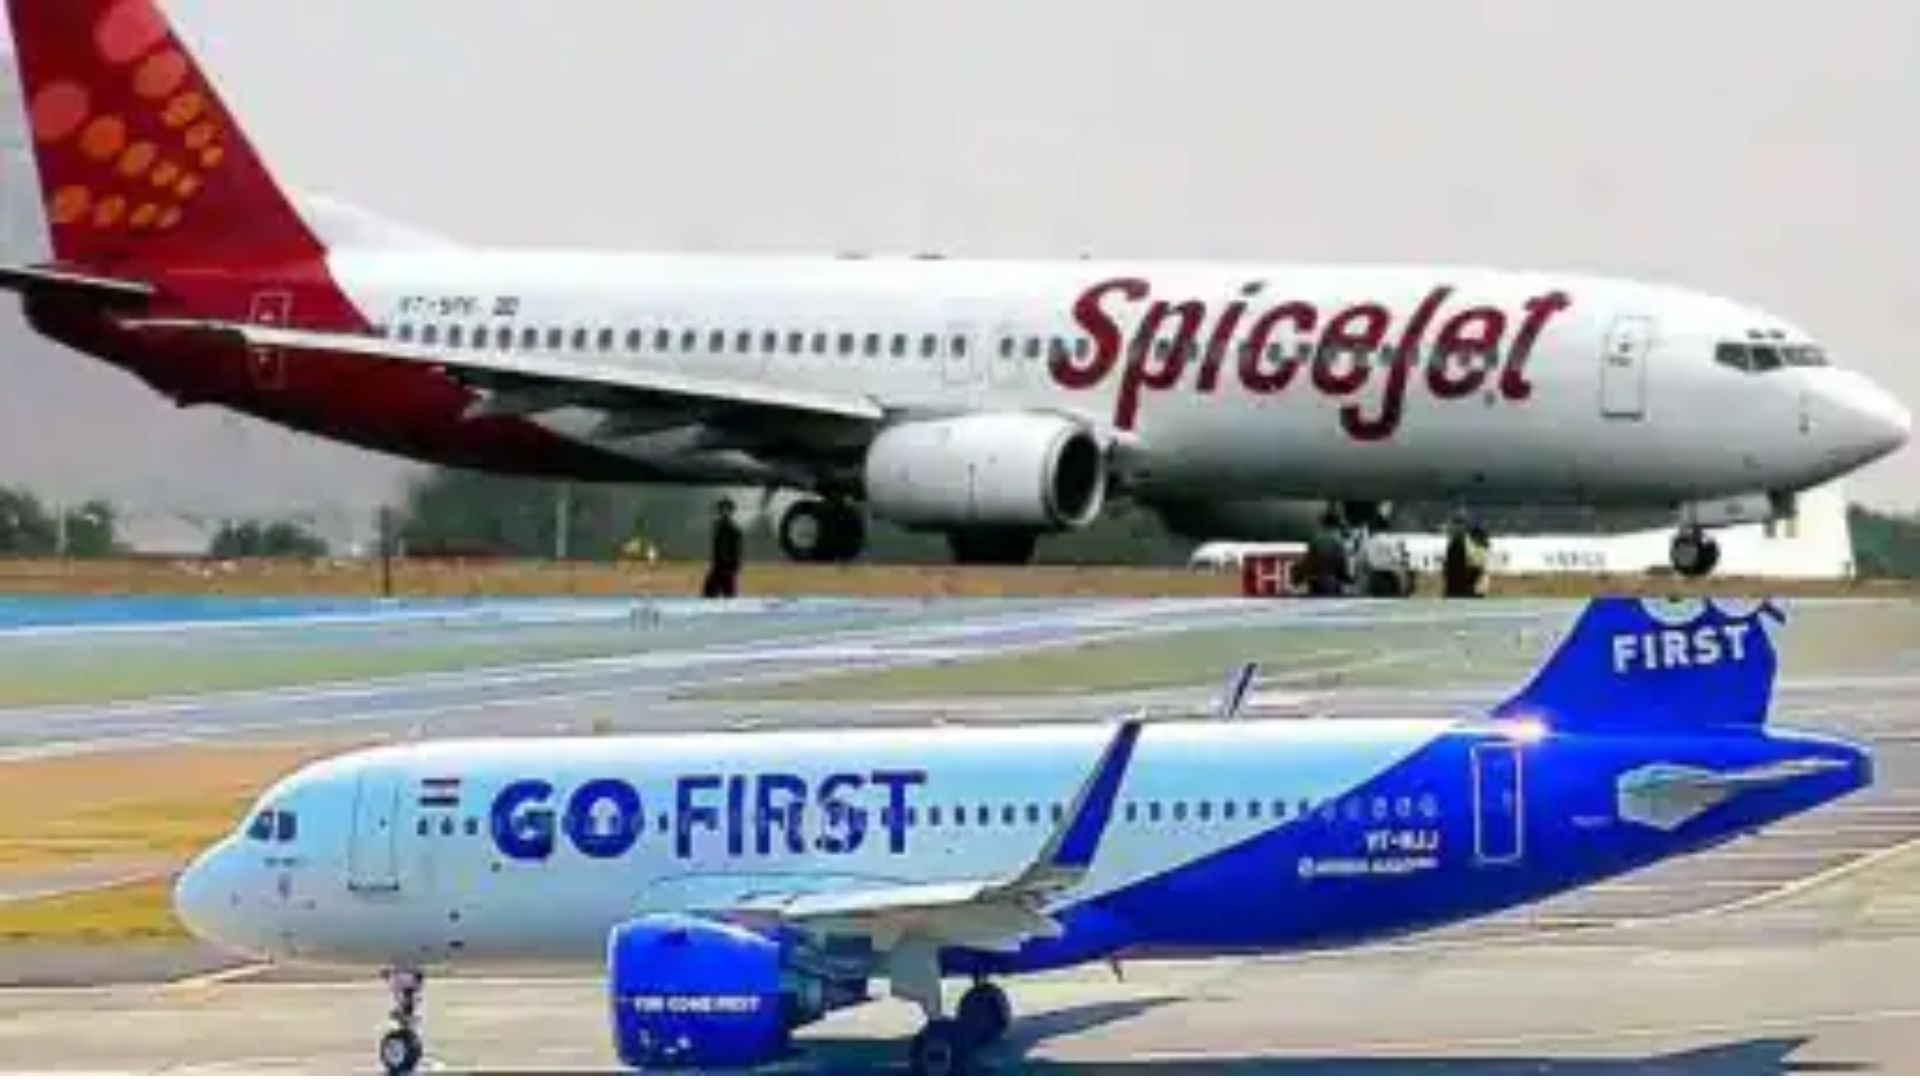 SpiceJet and Busy Bee submit bid for GoFirst